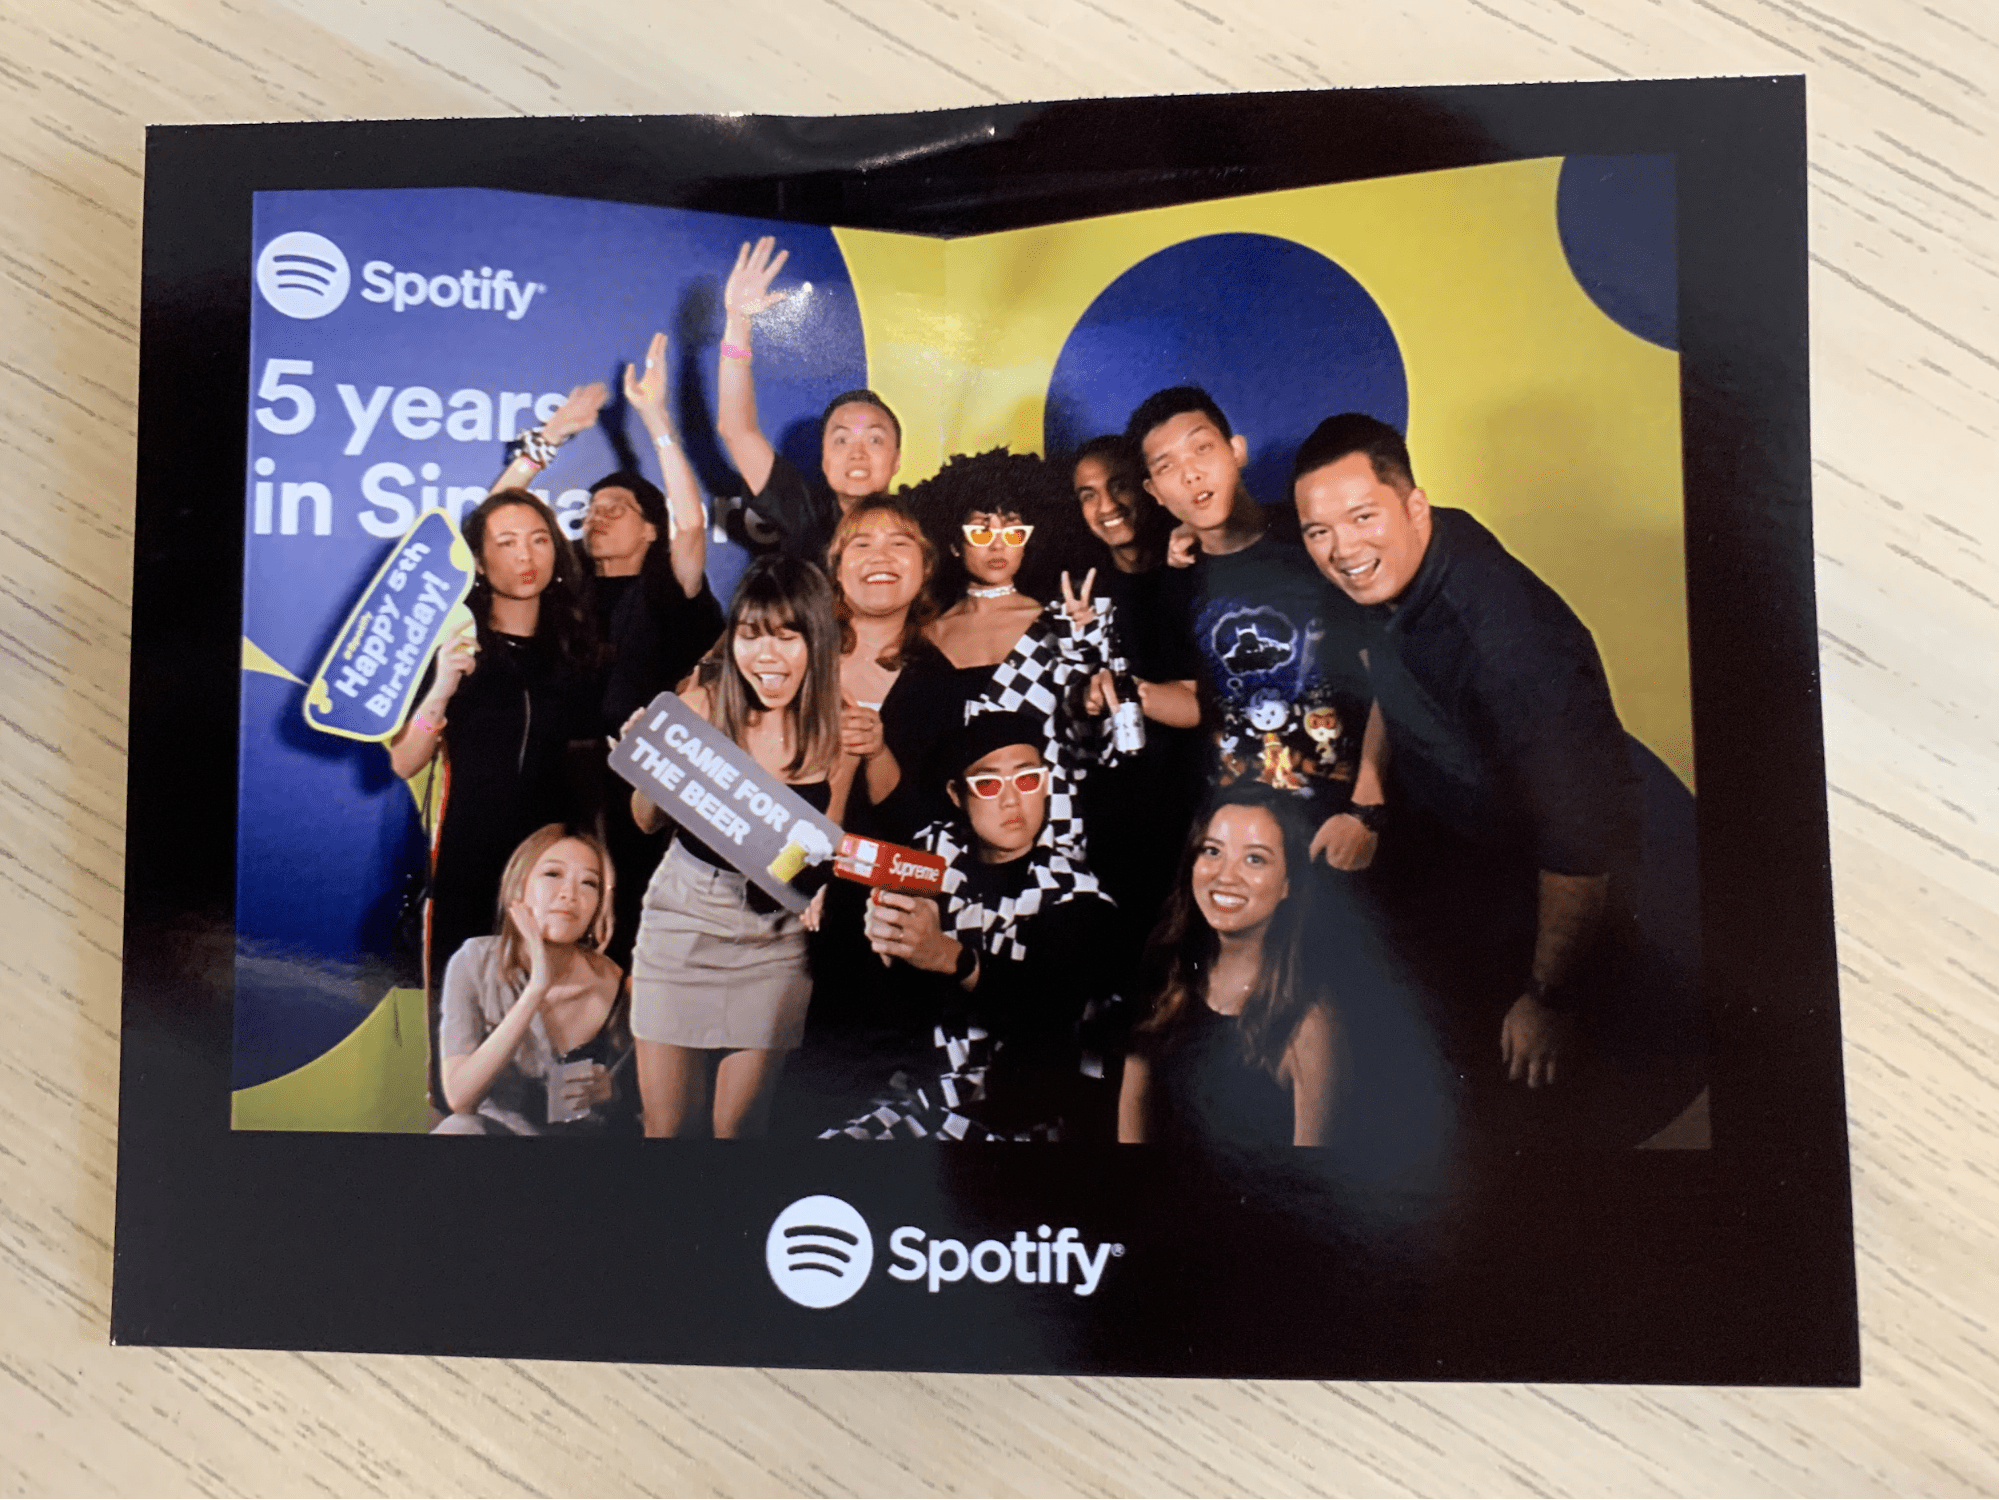 nikki homaili with her colleagues at spotify's 5th anniversary event